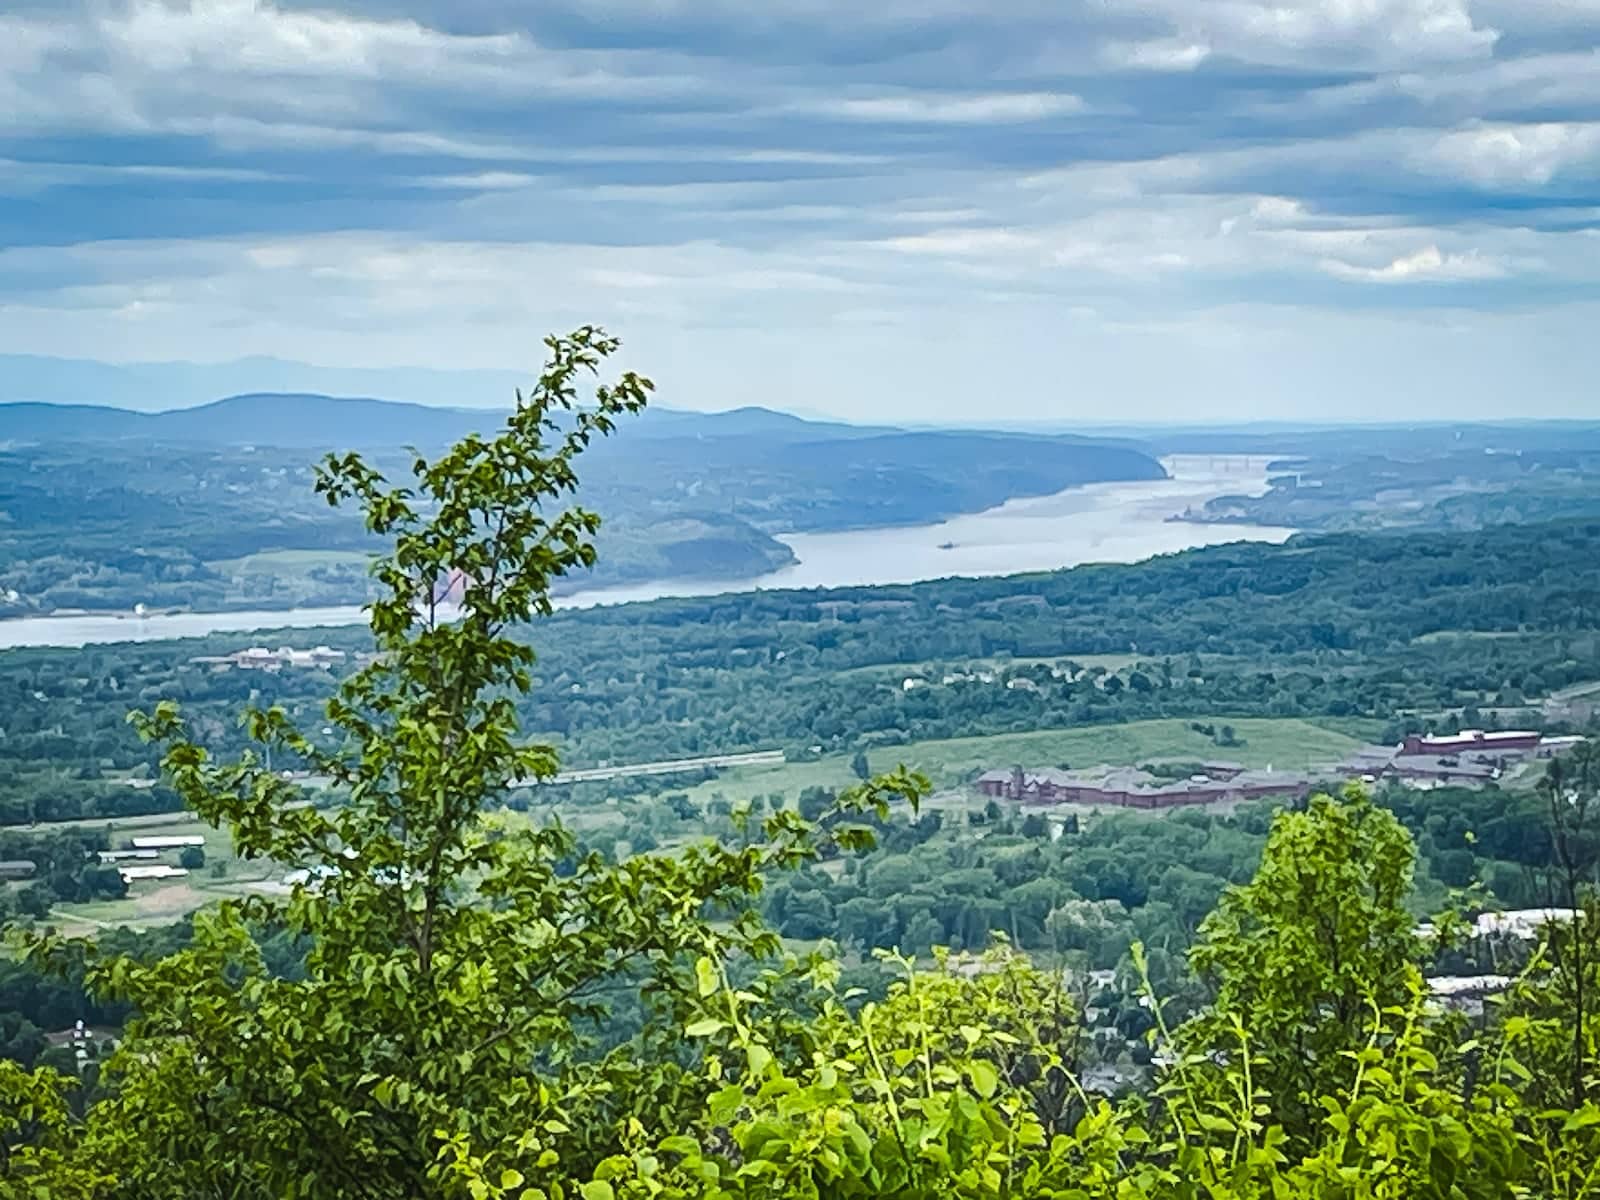 Hudson River view from Mount Beacon